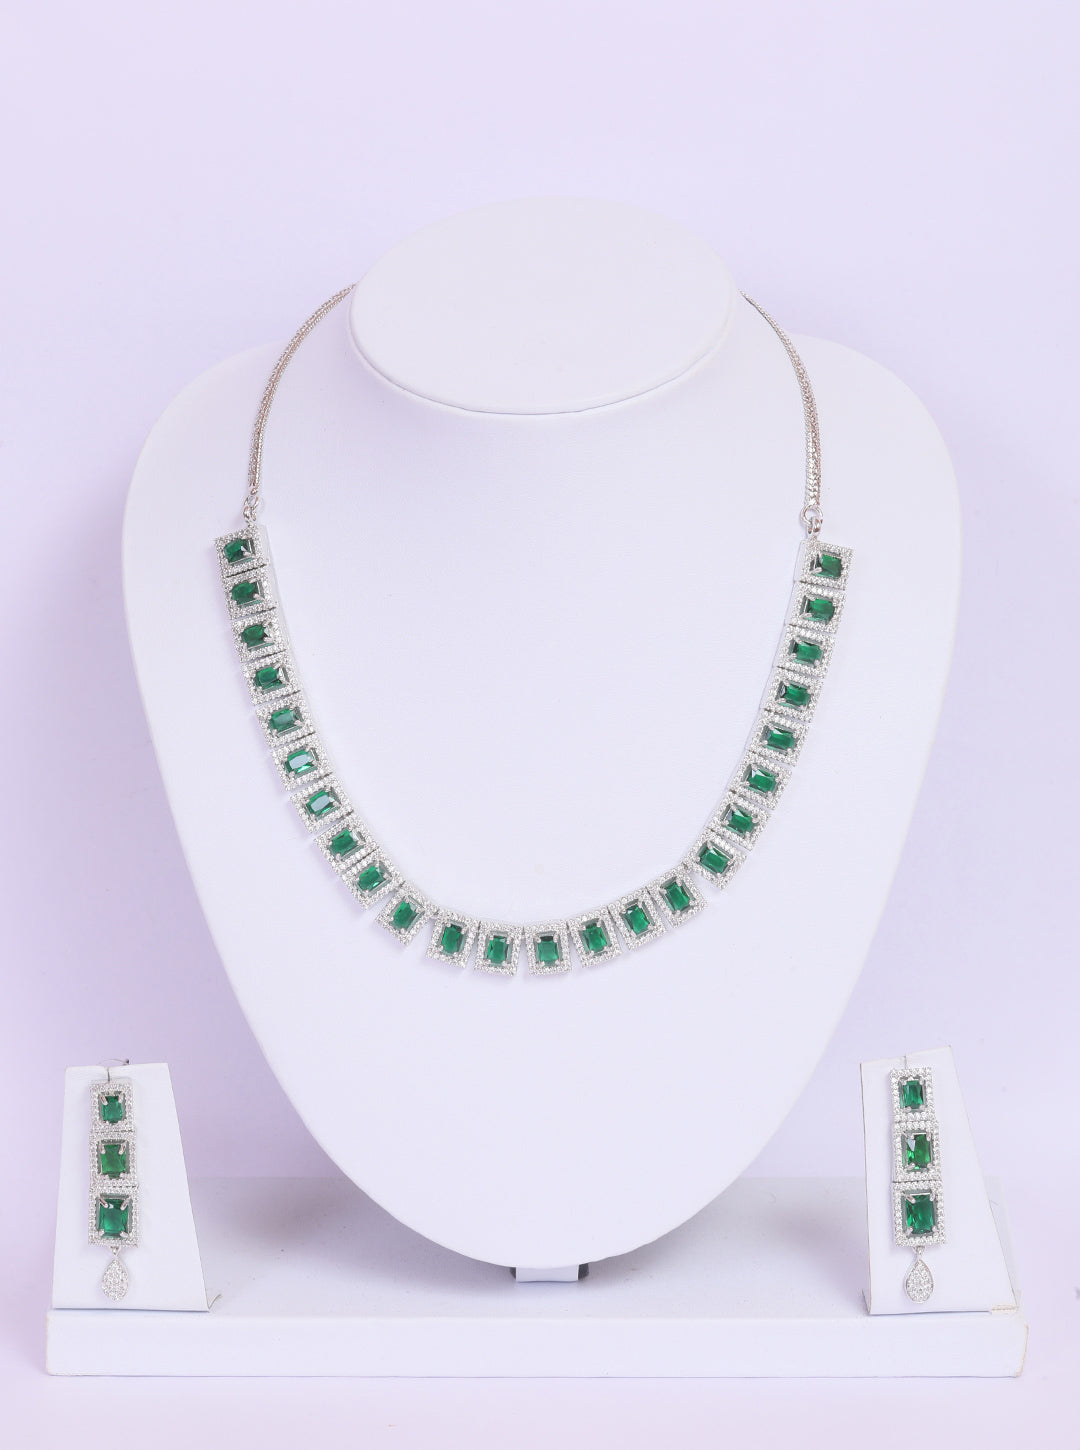 Premium White Gold Plated with sparkling Green White CZ stones Designer Necklace Set 8935N